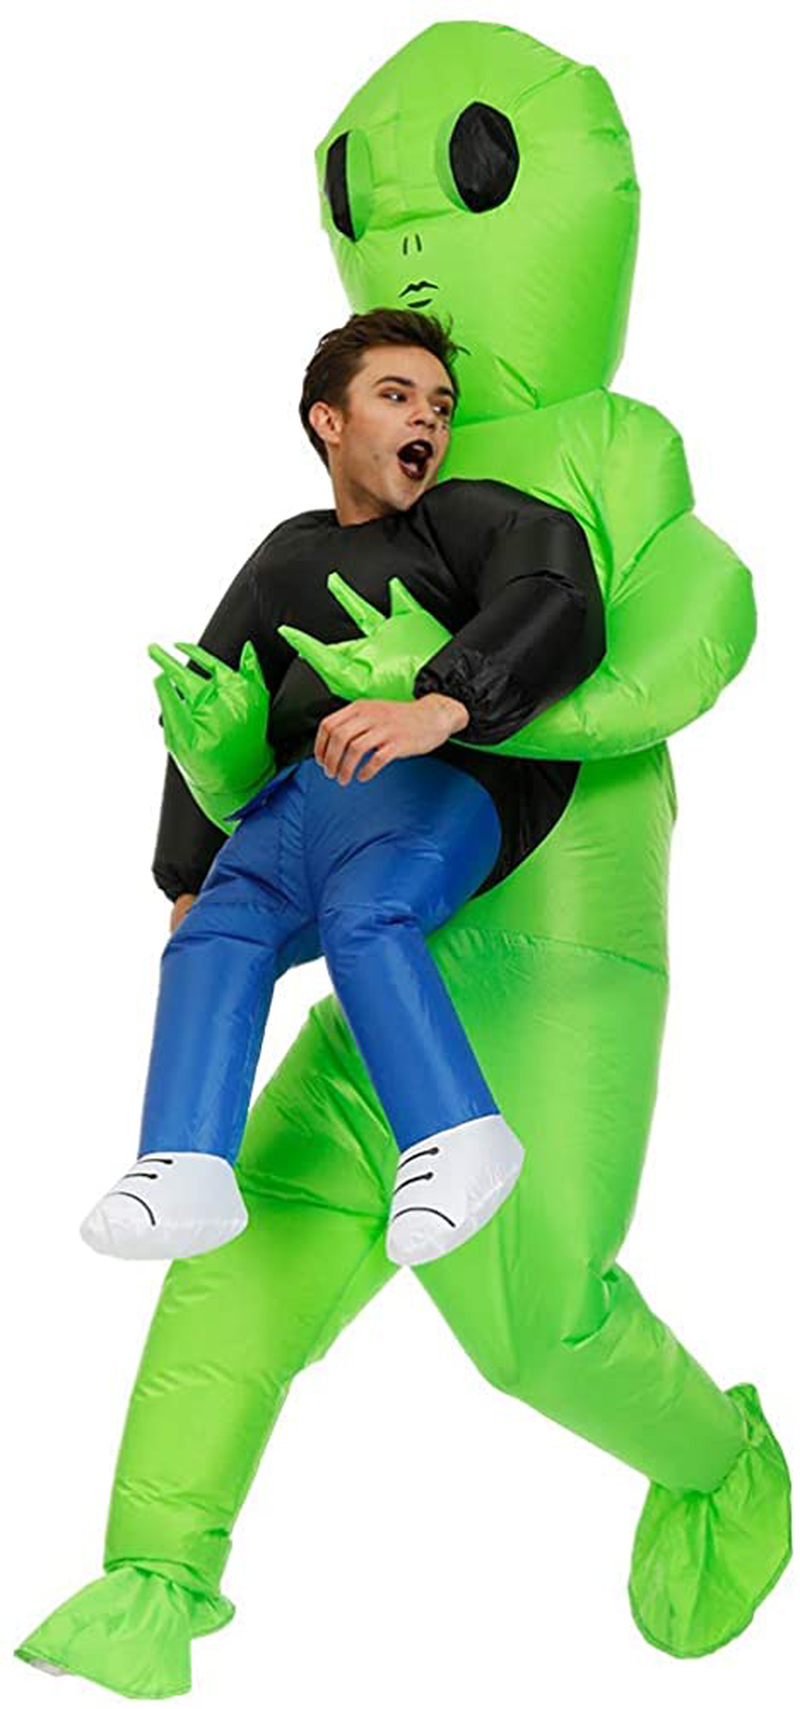 Kooy Inflatable Alien Costume for Adult (Adult - Et Alien) Apparel & Accessories > Costumes & Accessories > Costumes KOOY   